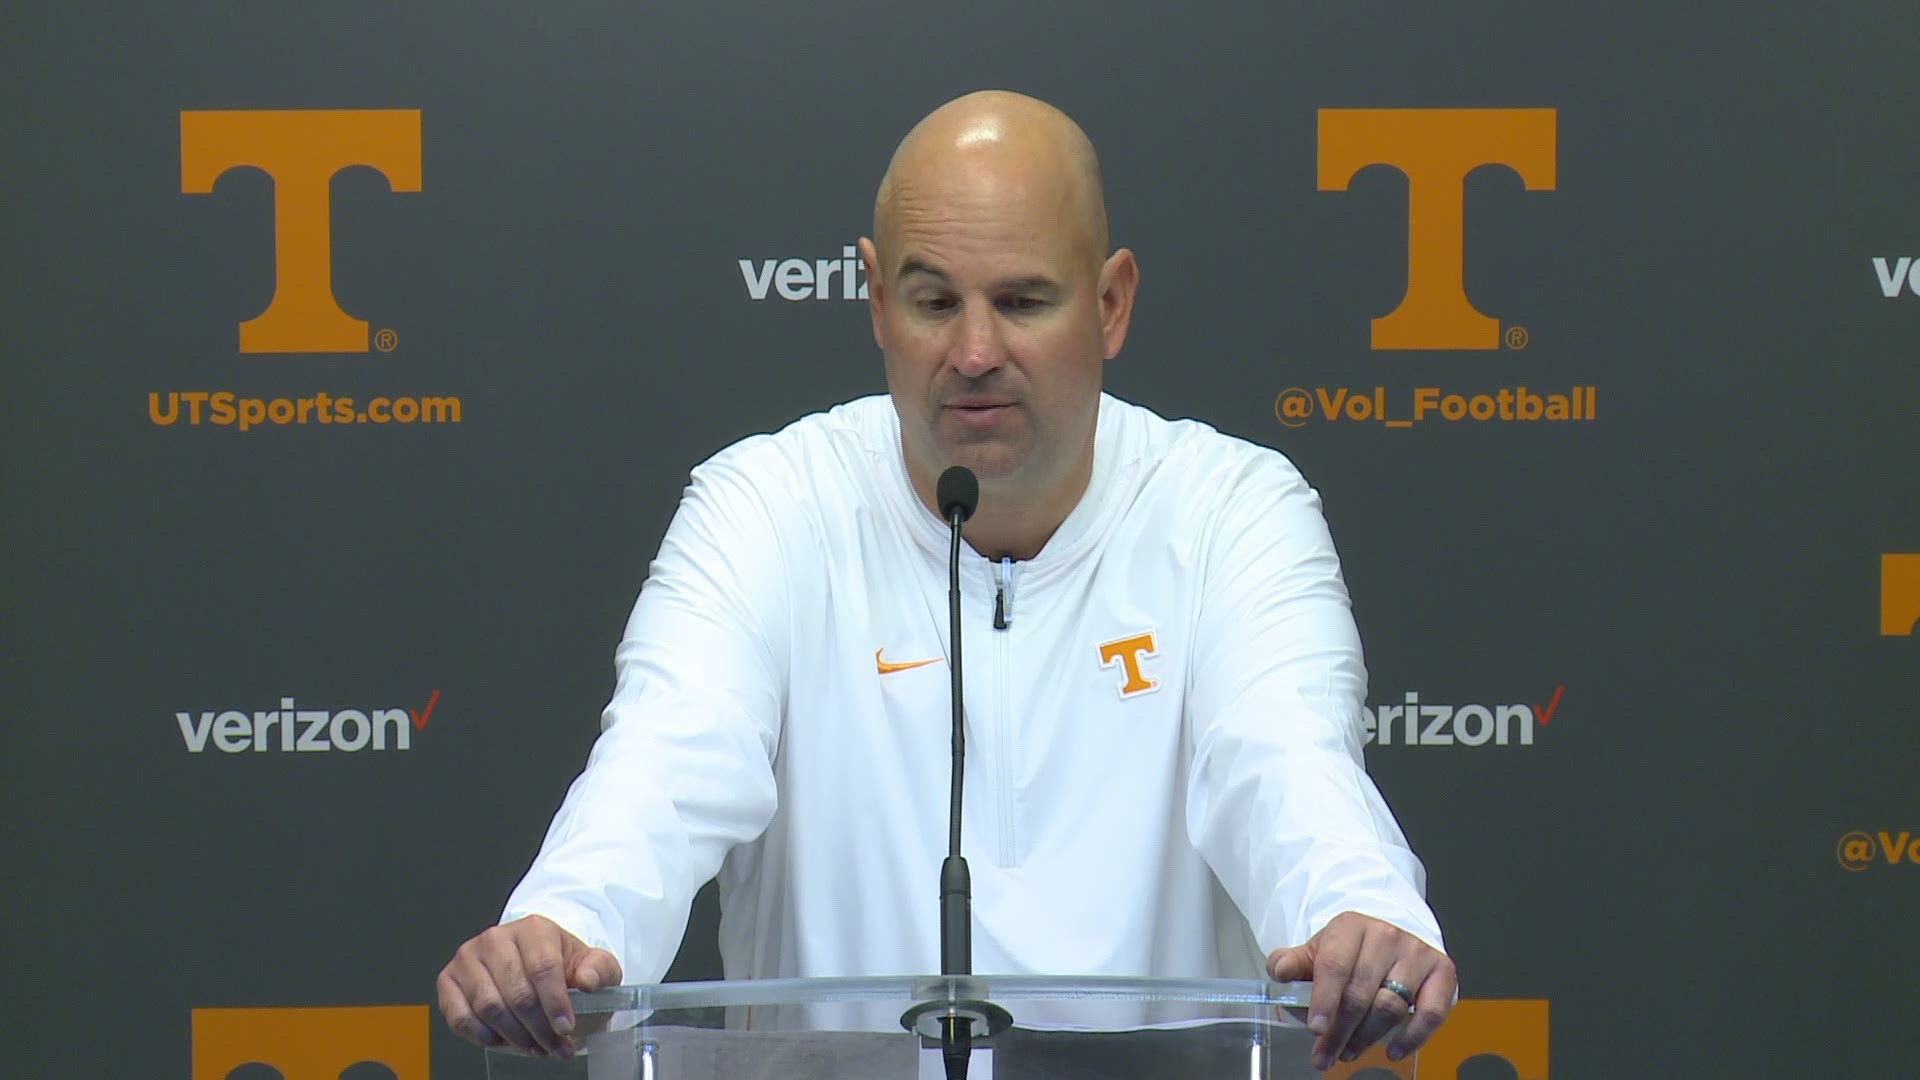 Jeremy Pruitt stopped the Vol Walk at the corner of Peyton Manning Pass and Phillip Fulmer Way to make sure his team understood who they were playing for - the passionate fans gathered around them.